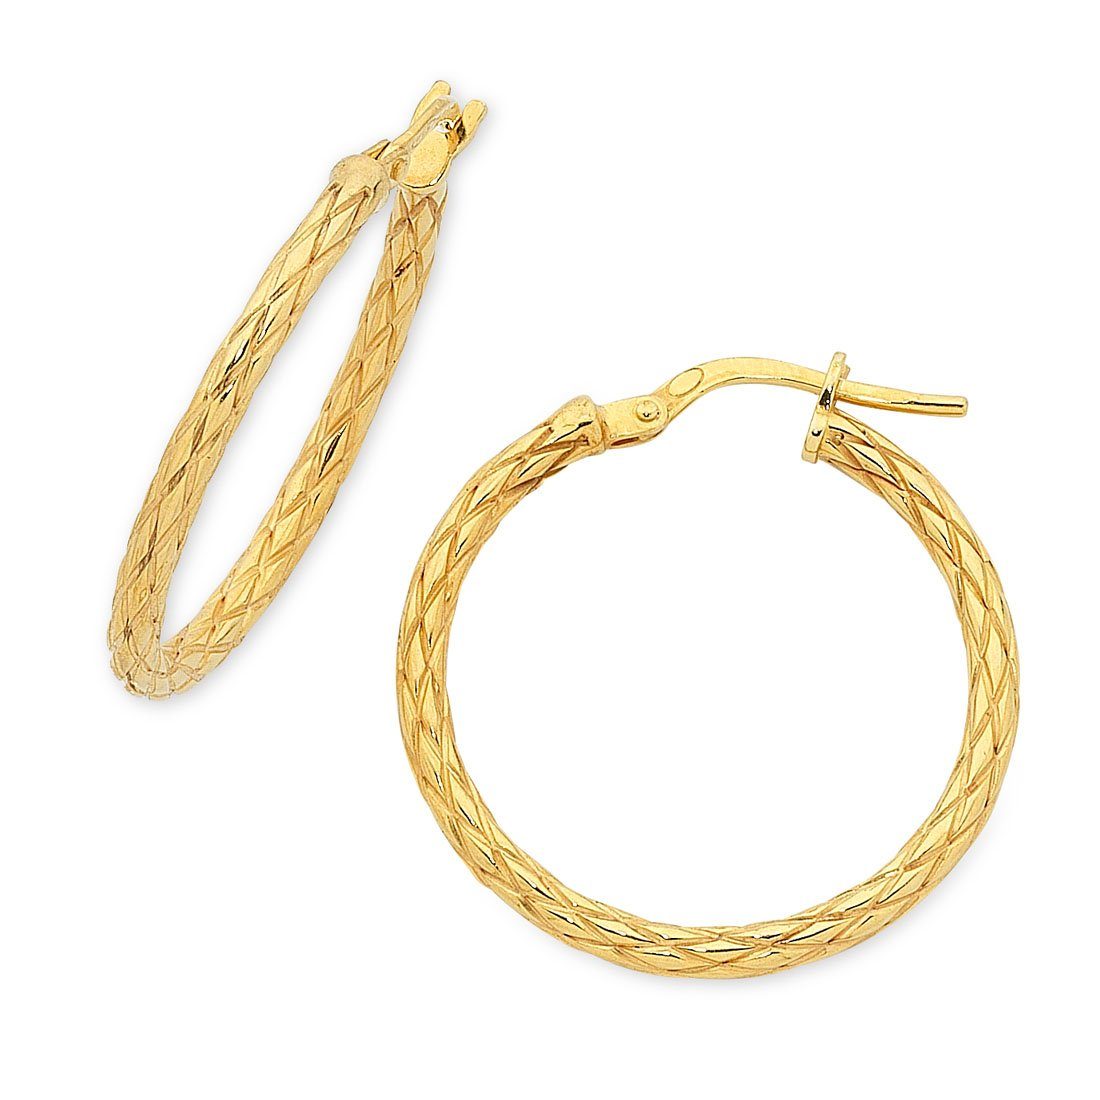 Bevilles 9ct Yellow Gold Silver Infused Patterned Hoop Earrings 20mm